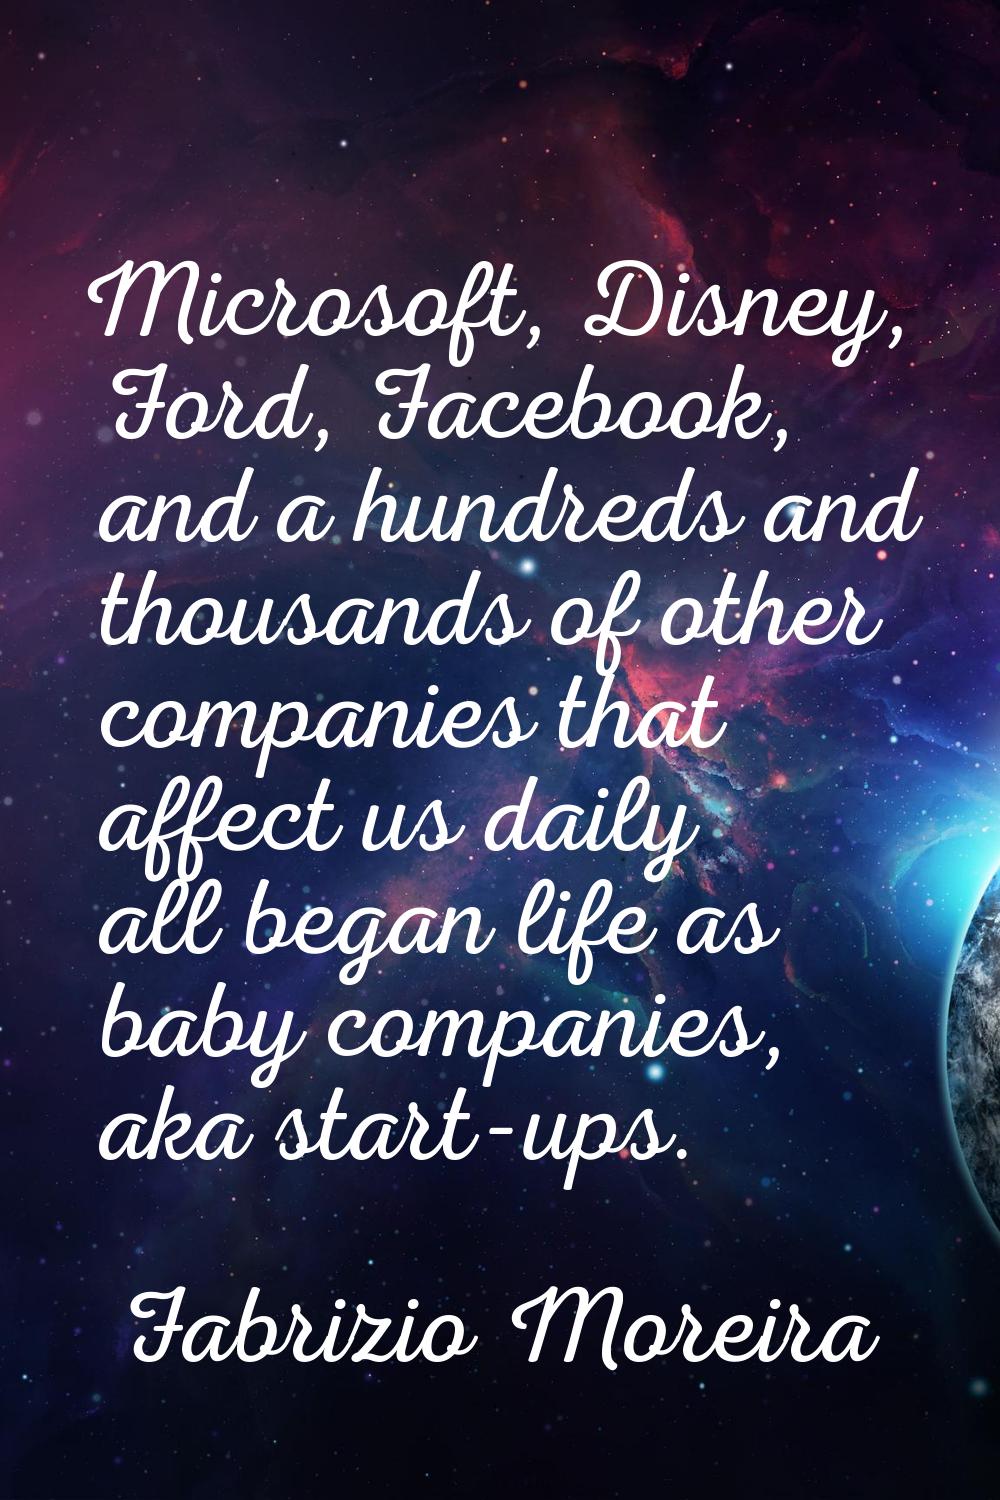 Microsoft, Disney, Ford, Facebook, and a hundreds and thousands of other companies that affect us d